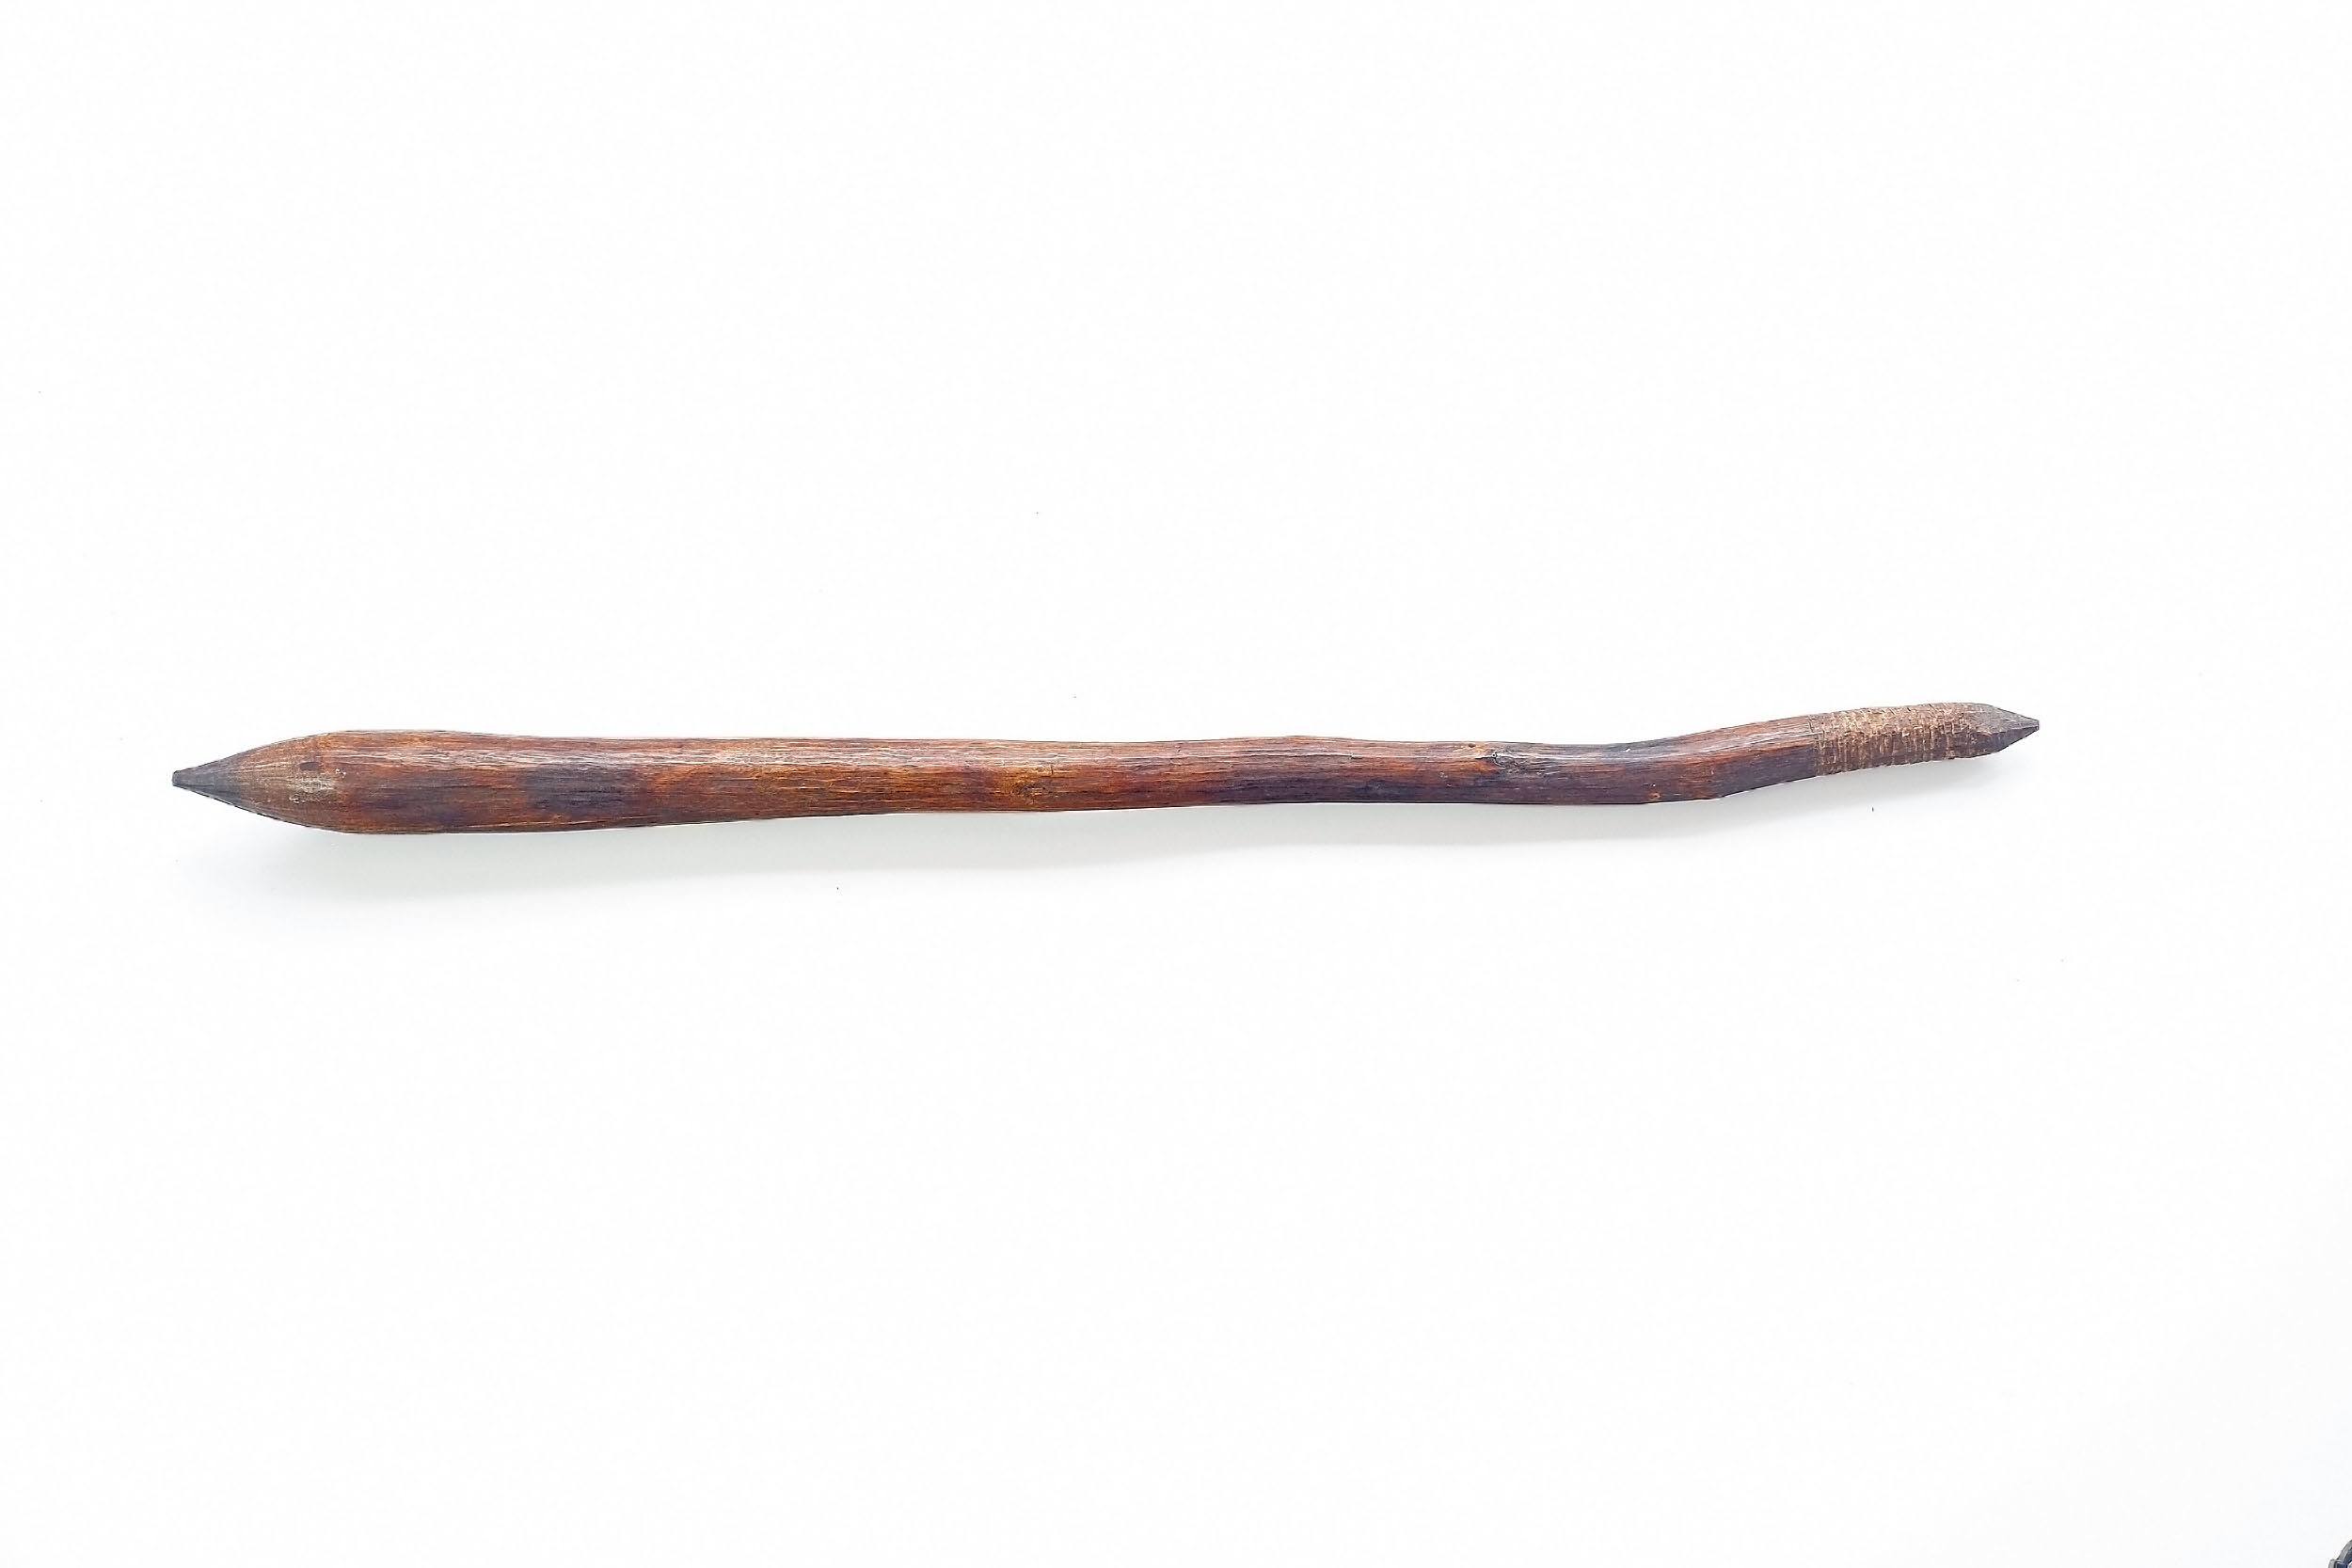 'Aboriginal Club, with Grooved Decoration, 19th/20th Century'